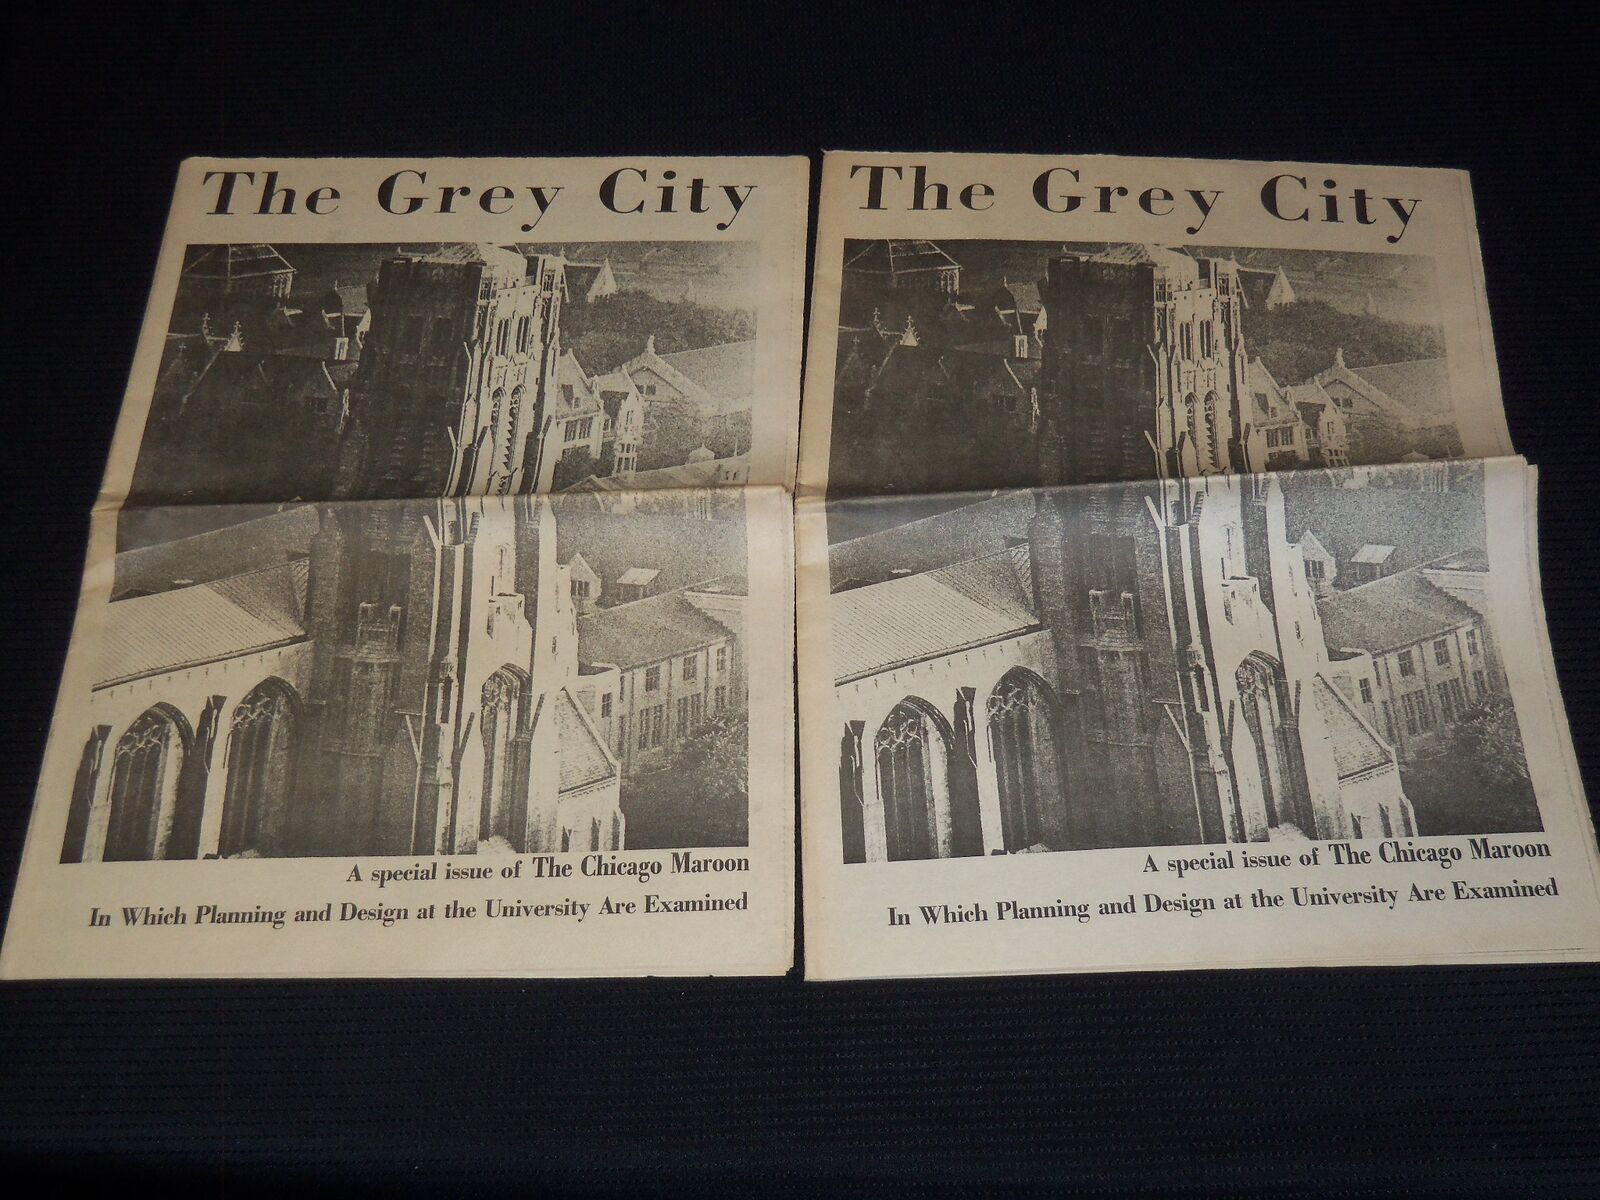 1968 MARCH 8 CHICAGO MAROON - THE GREY CITY NEWSPAPER LOT OF 2 - NP 3296B